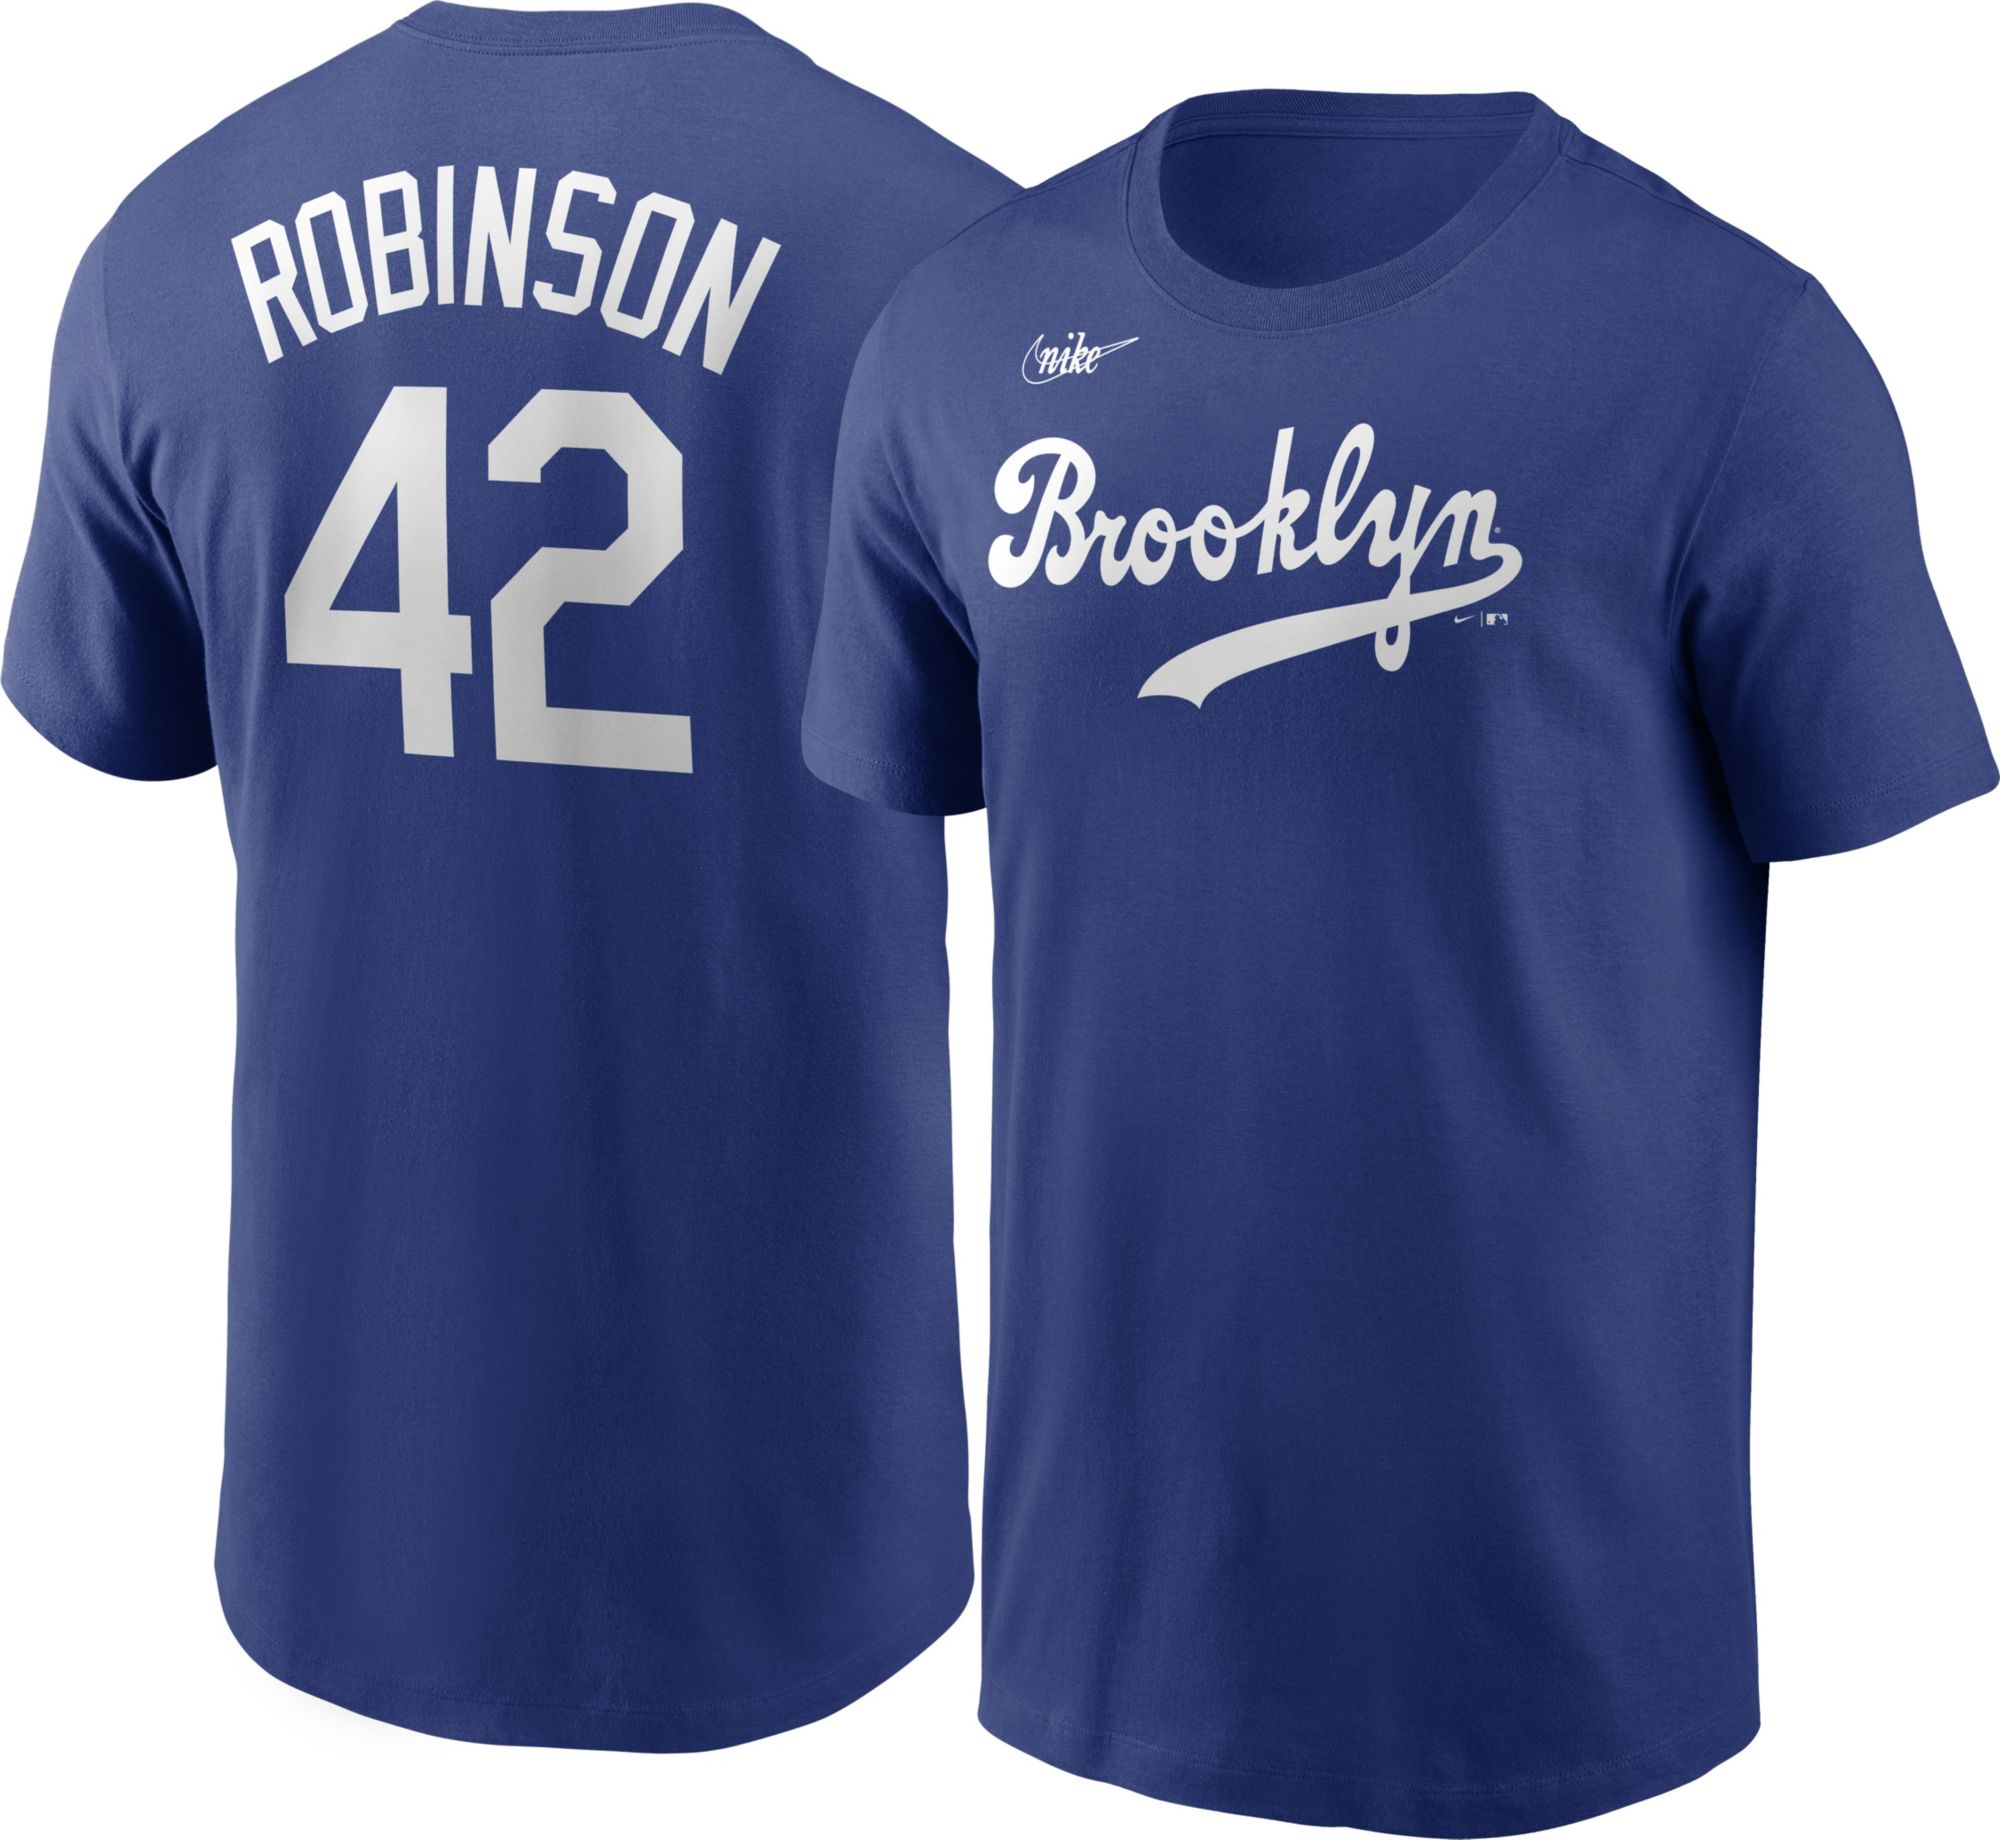 Dodgers No42 Jackie Robinson Men's Nike Black MVP Limited Player Edition Jersey